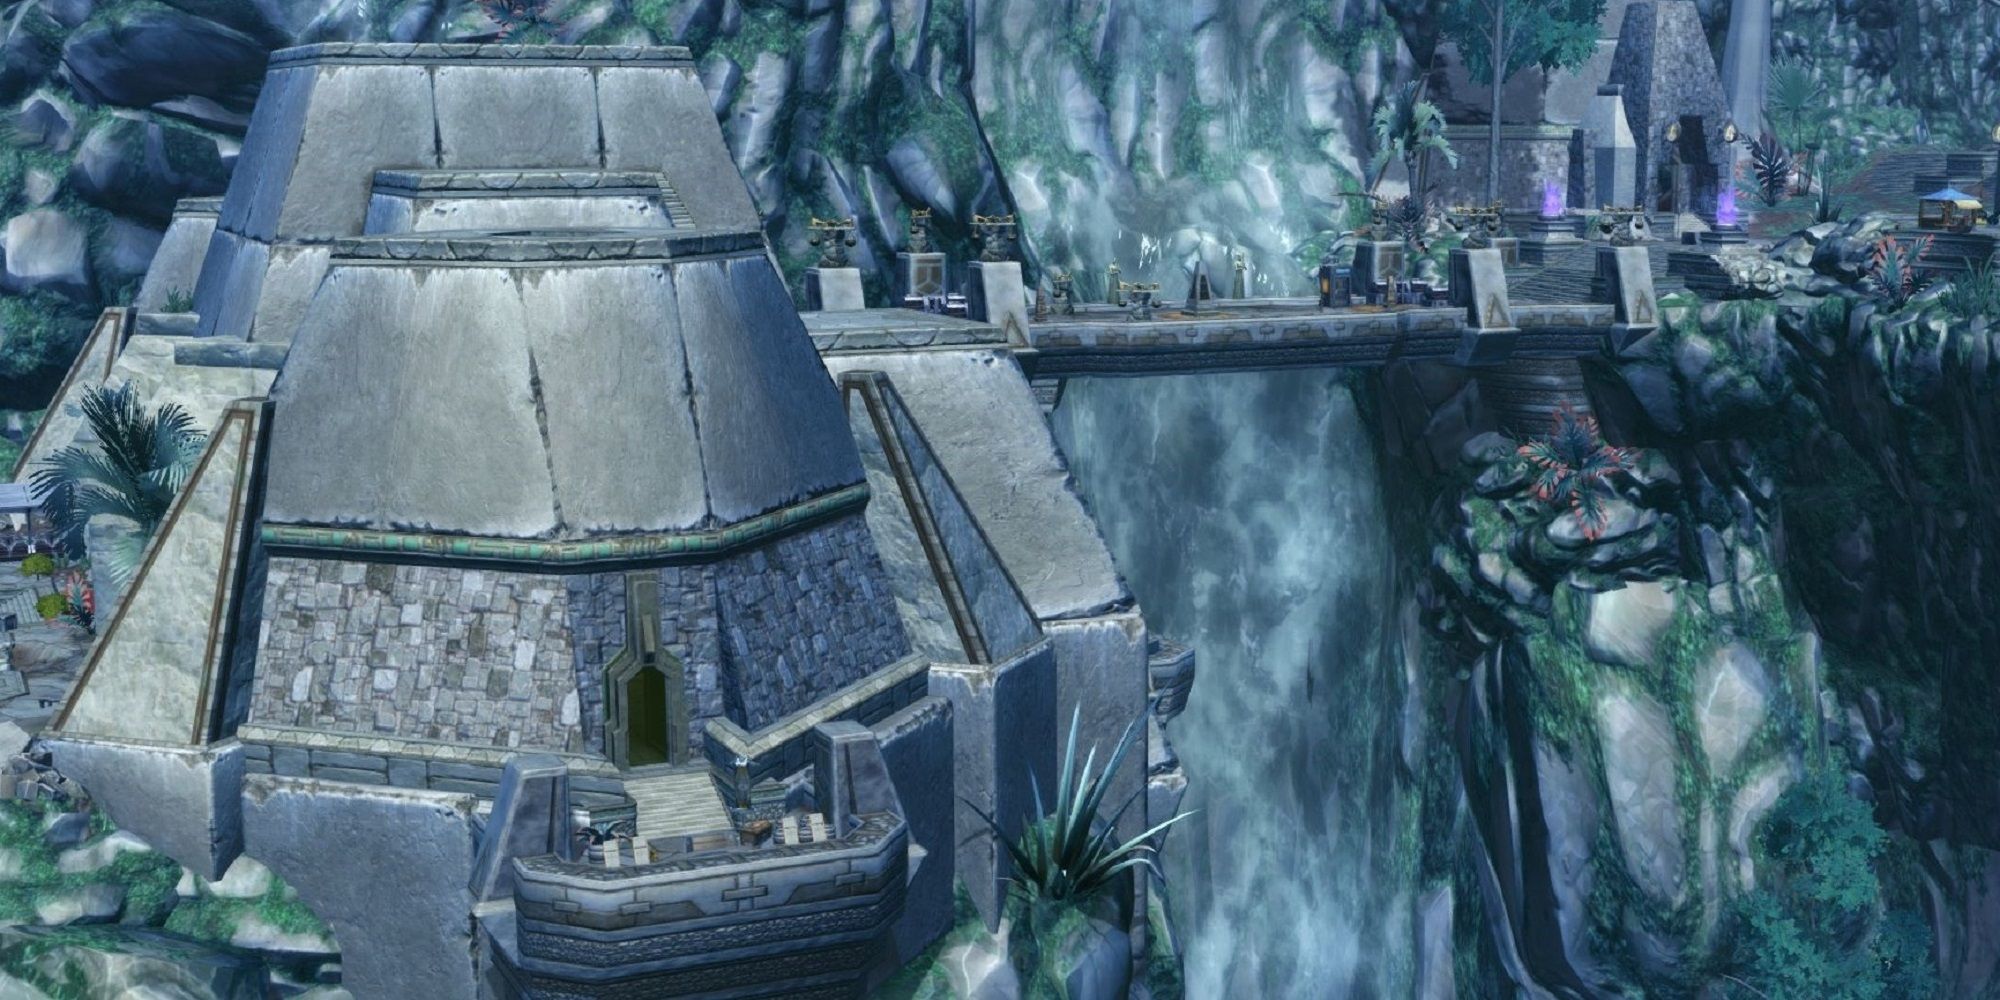 SWTOR's Yavin 4 Temple, with a bridge and waterfall in the background